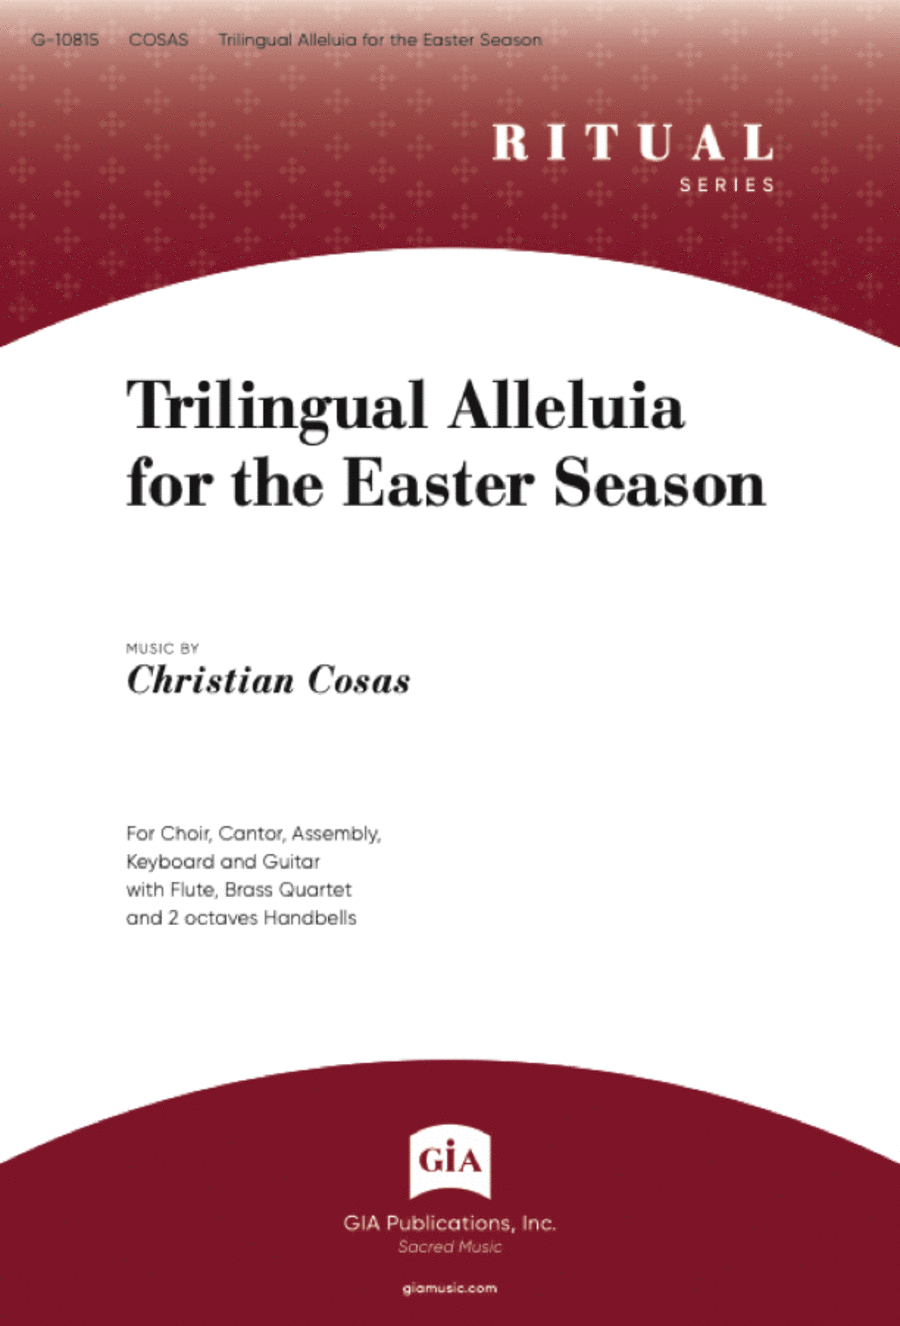 Trilingual Alleluia for the Easter Season - Full Score and Parts